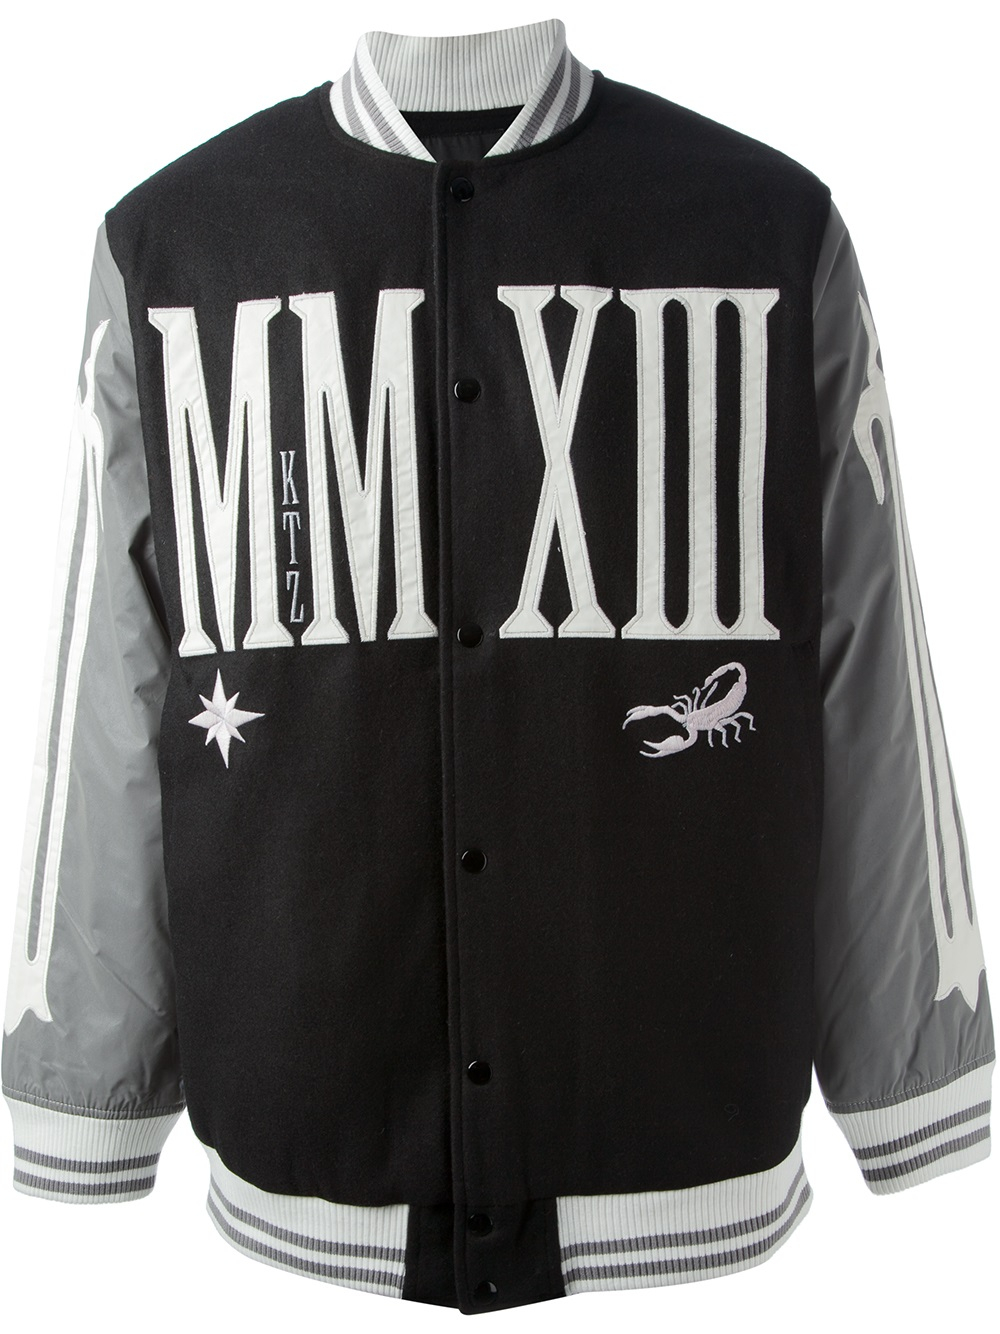 Lyst - Ktz Tatoo Embroidery Sleeved Tailor Jacket in Black for Men